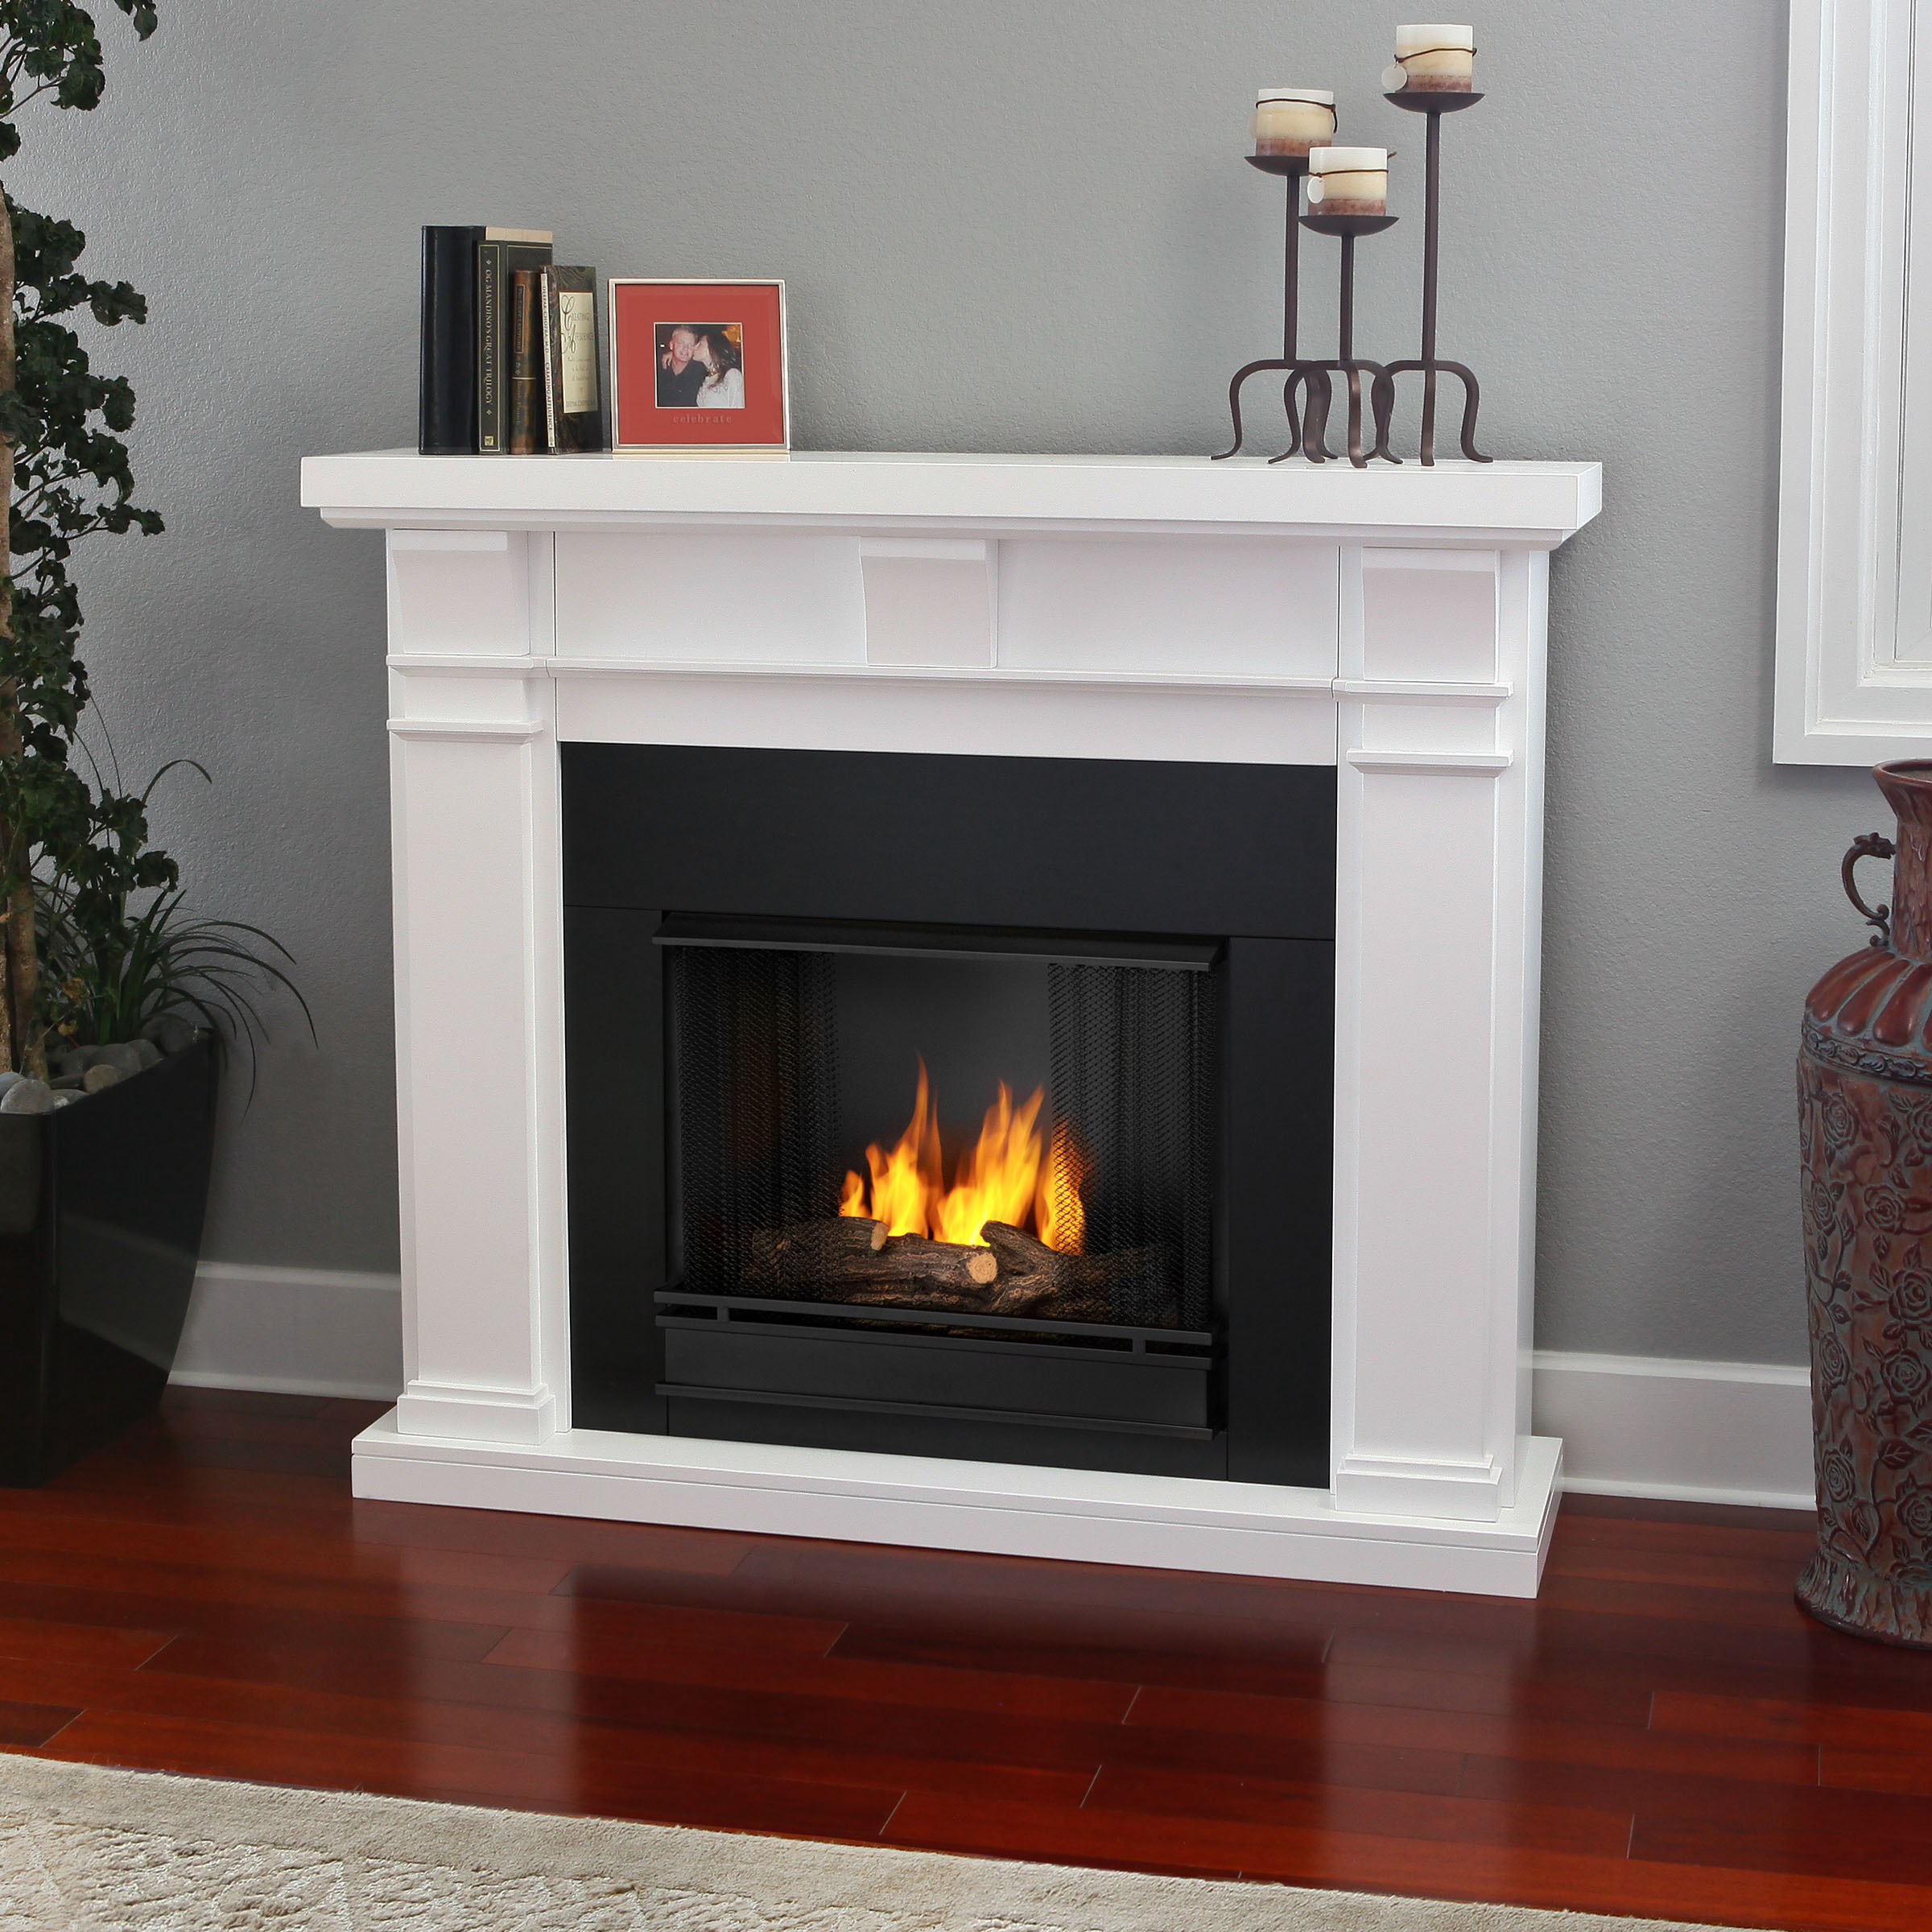 Real Flame Gel Fuel Fireplace New Real Flame Gel Fuel Fireplace Charming Fireplace